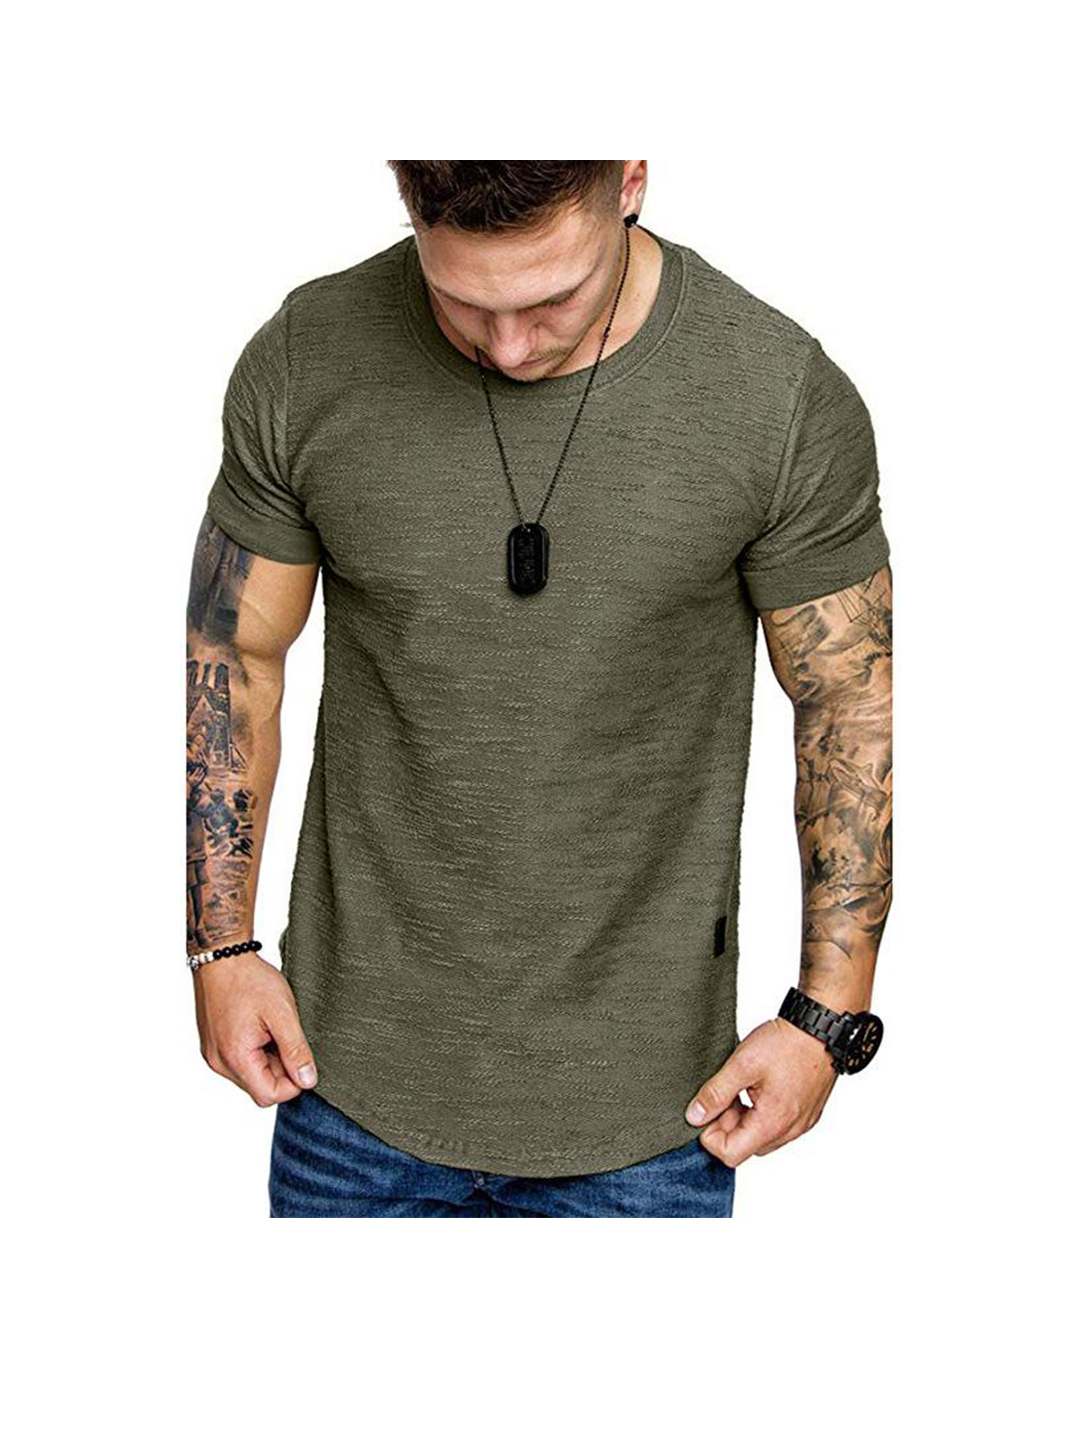 Poisonstreetwear Men's Textured Solid Color High Quality Crew Neck T-shirt Soft Breathable-poisonstreetwear.com